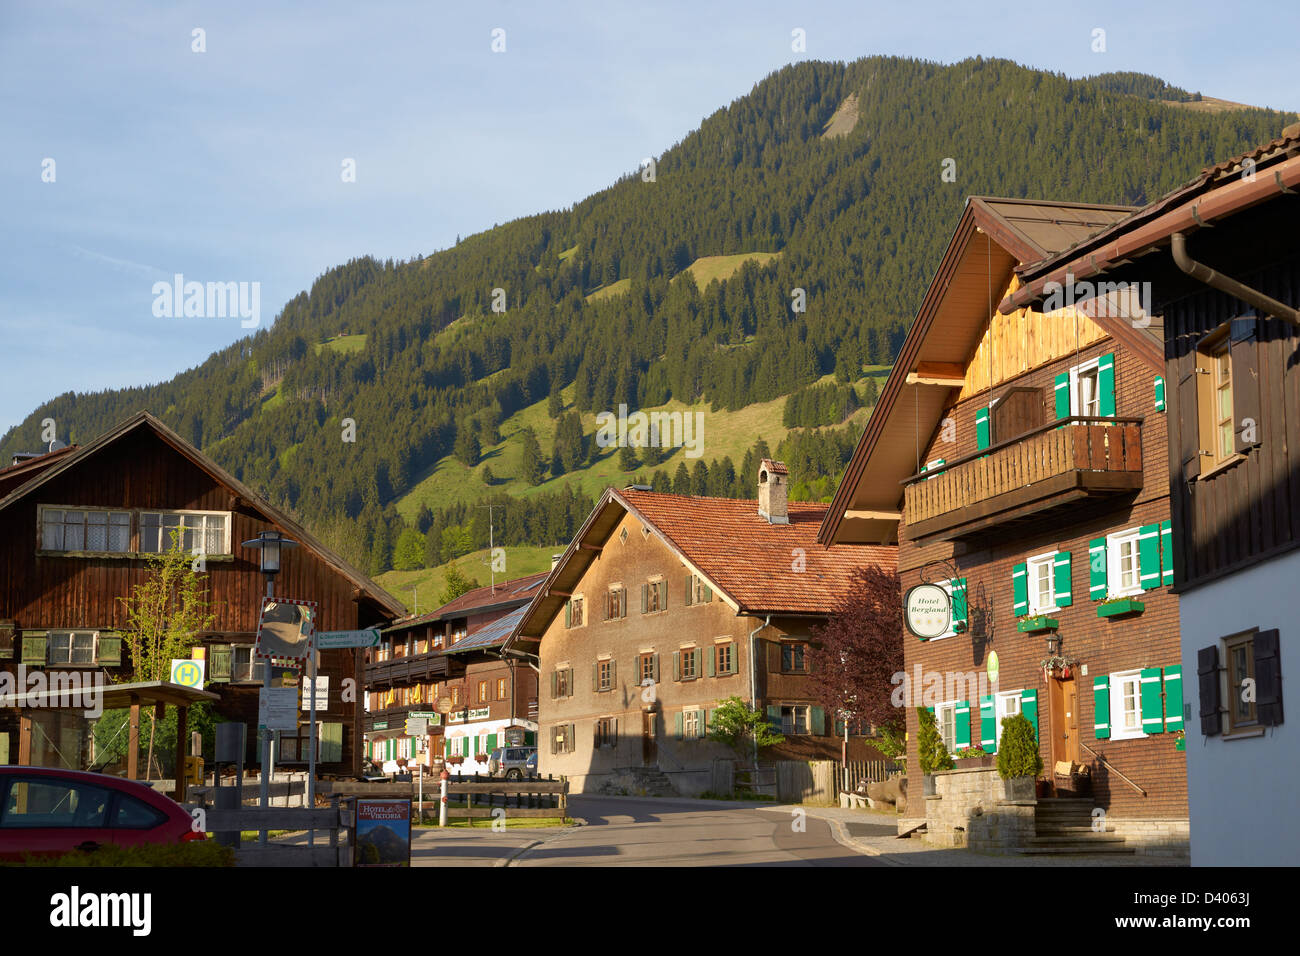 Typical wooden houses in the Allgäu Alps Stock Photo